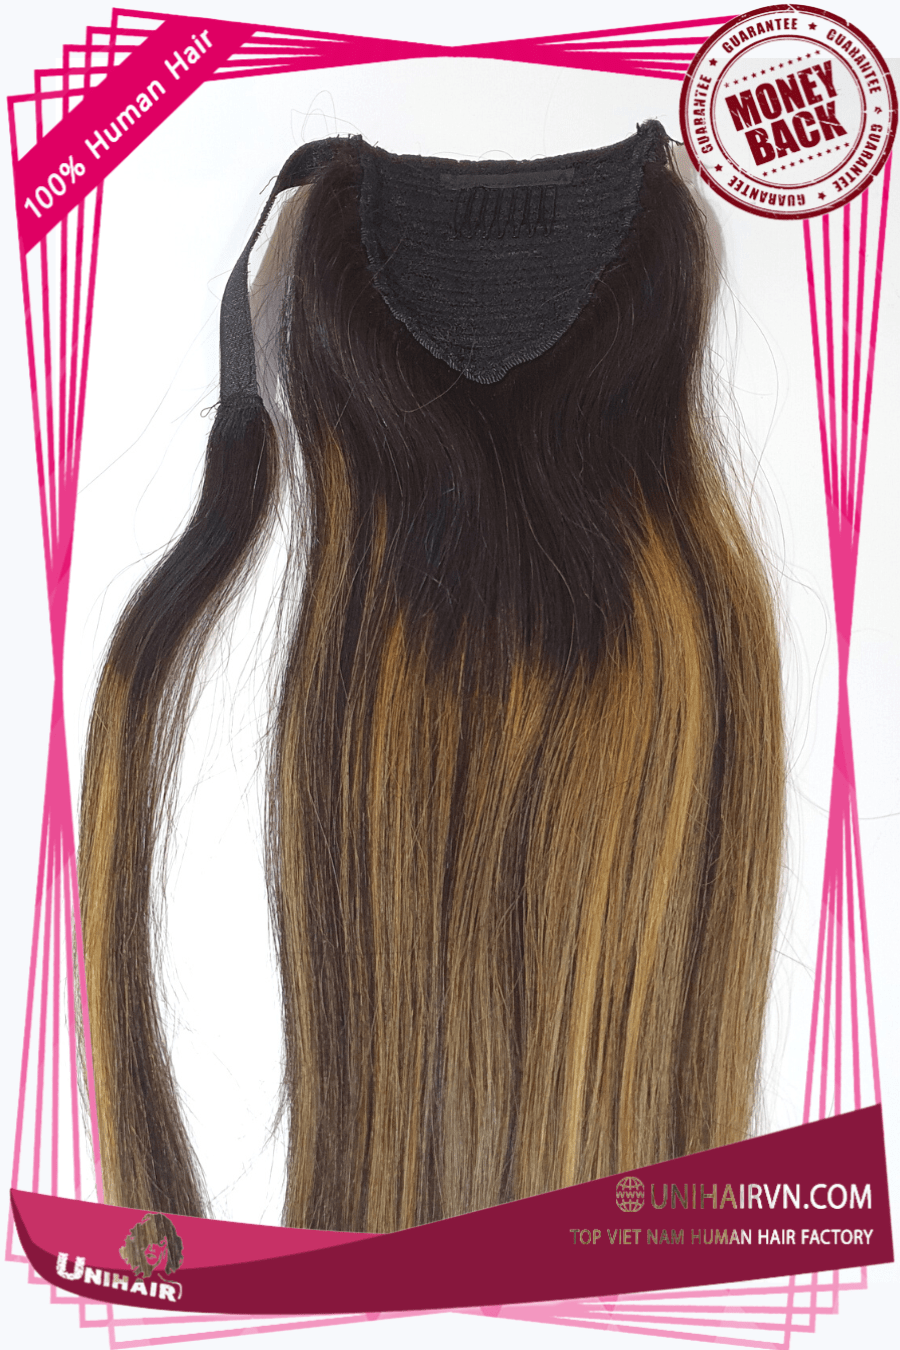 Ponytail Hair Extensions - Unihairvn- Vietnam Natural Hair Factory